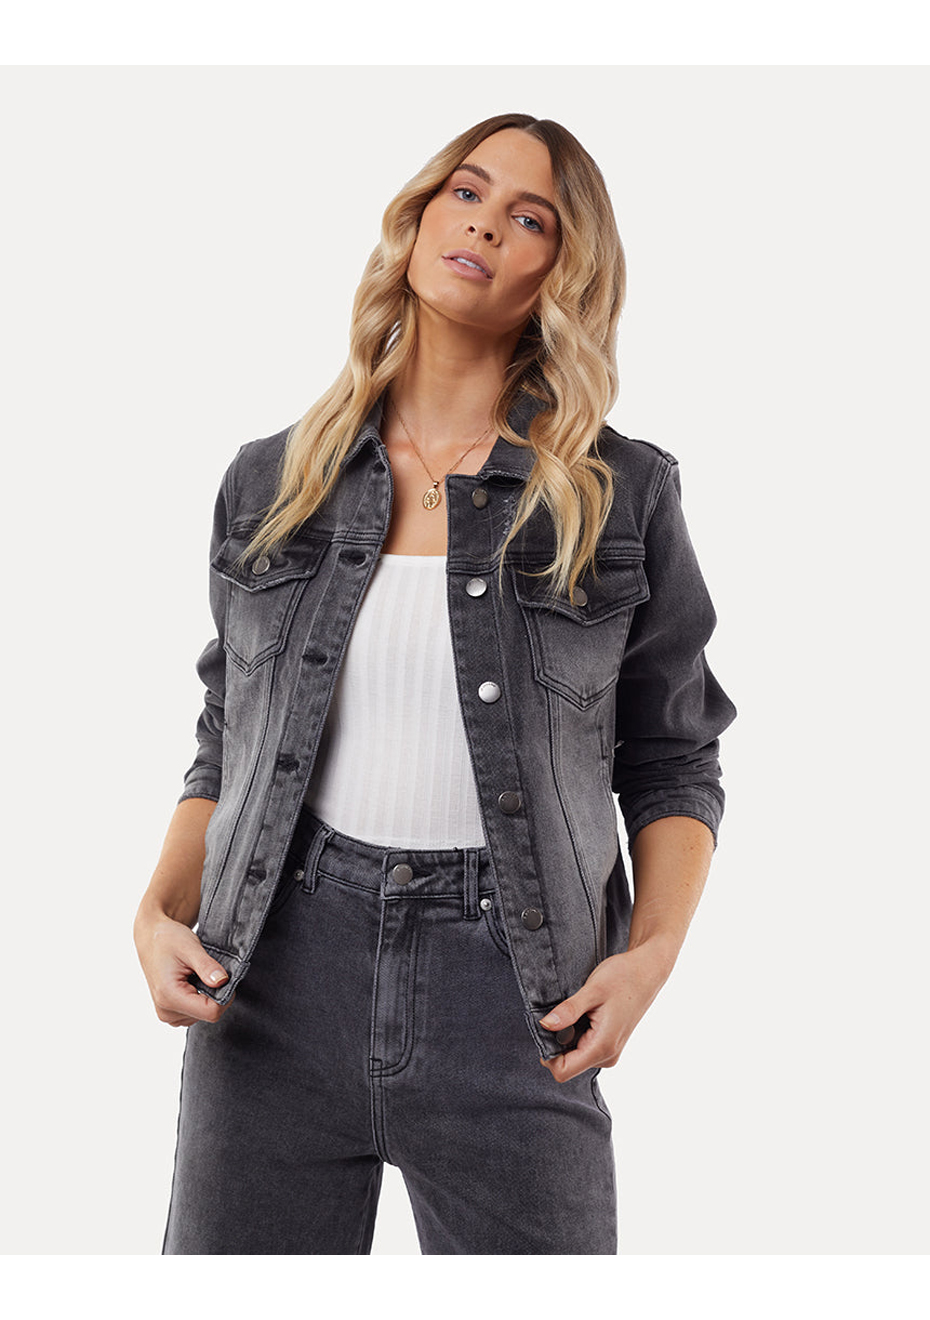 Dale Shacket I All About Eve I jackets I Lyn Rose Boutique – Lyn Rose  Boutique Pty Ltd